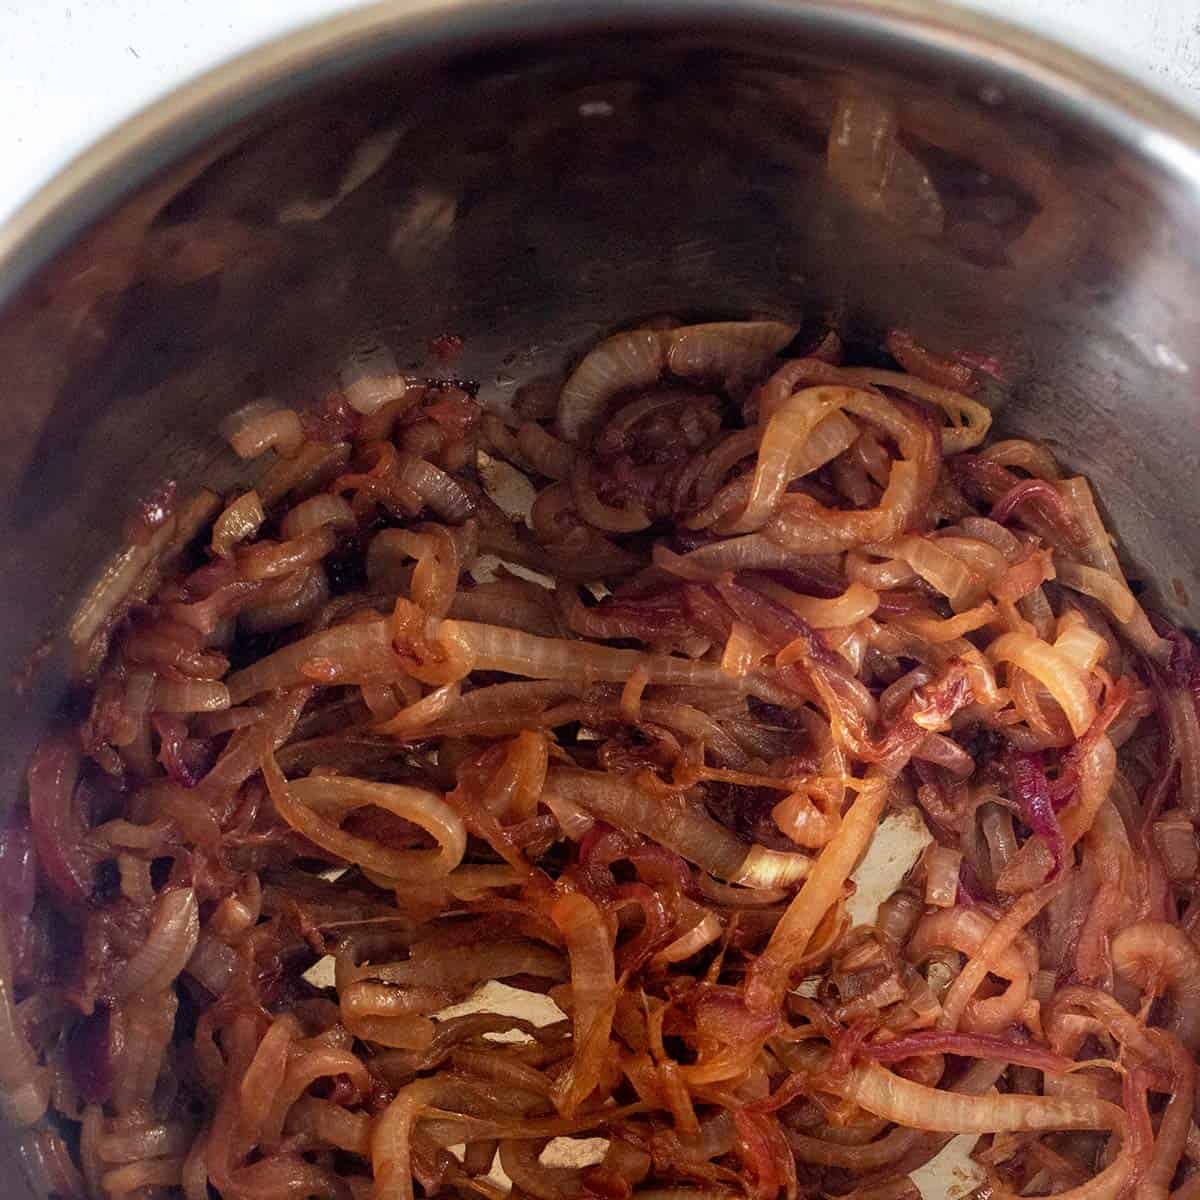 Onions after being caramelized in the pot.